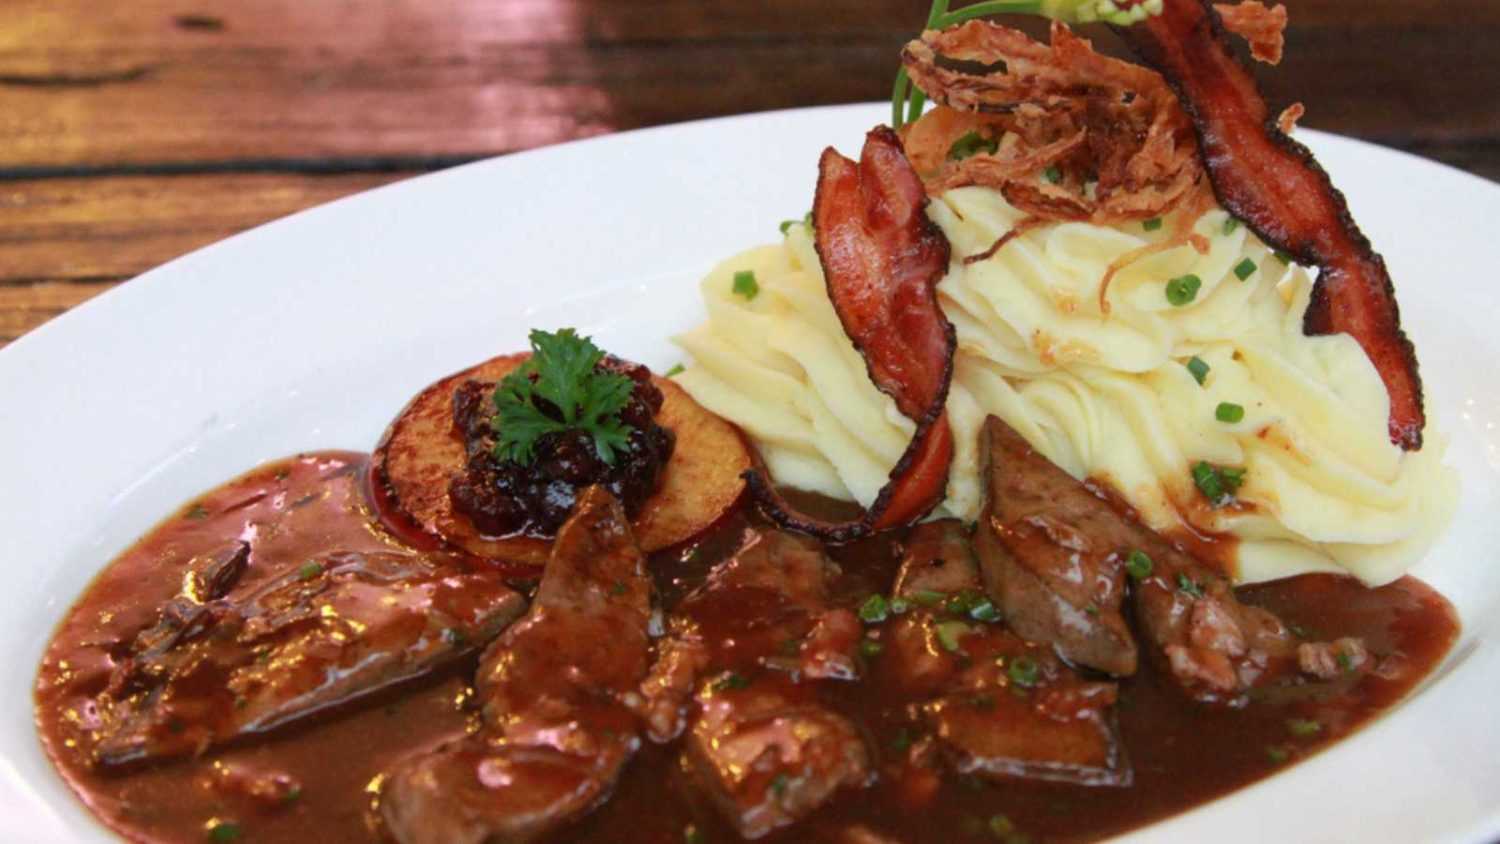 Veal liver Berlin style, served with caramelized apple ring, potato mash and crispy bacon